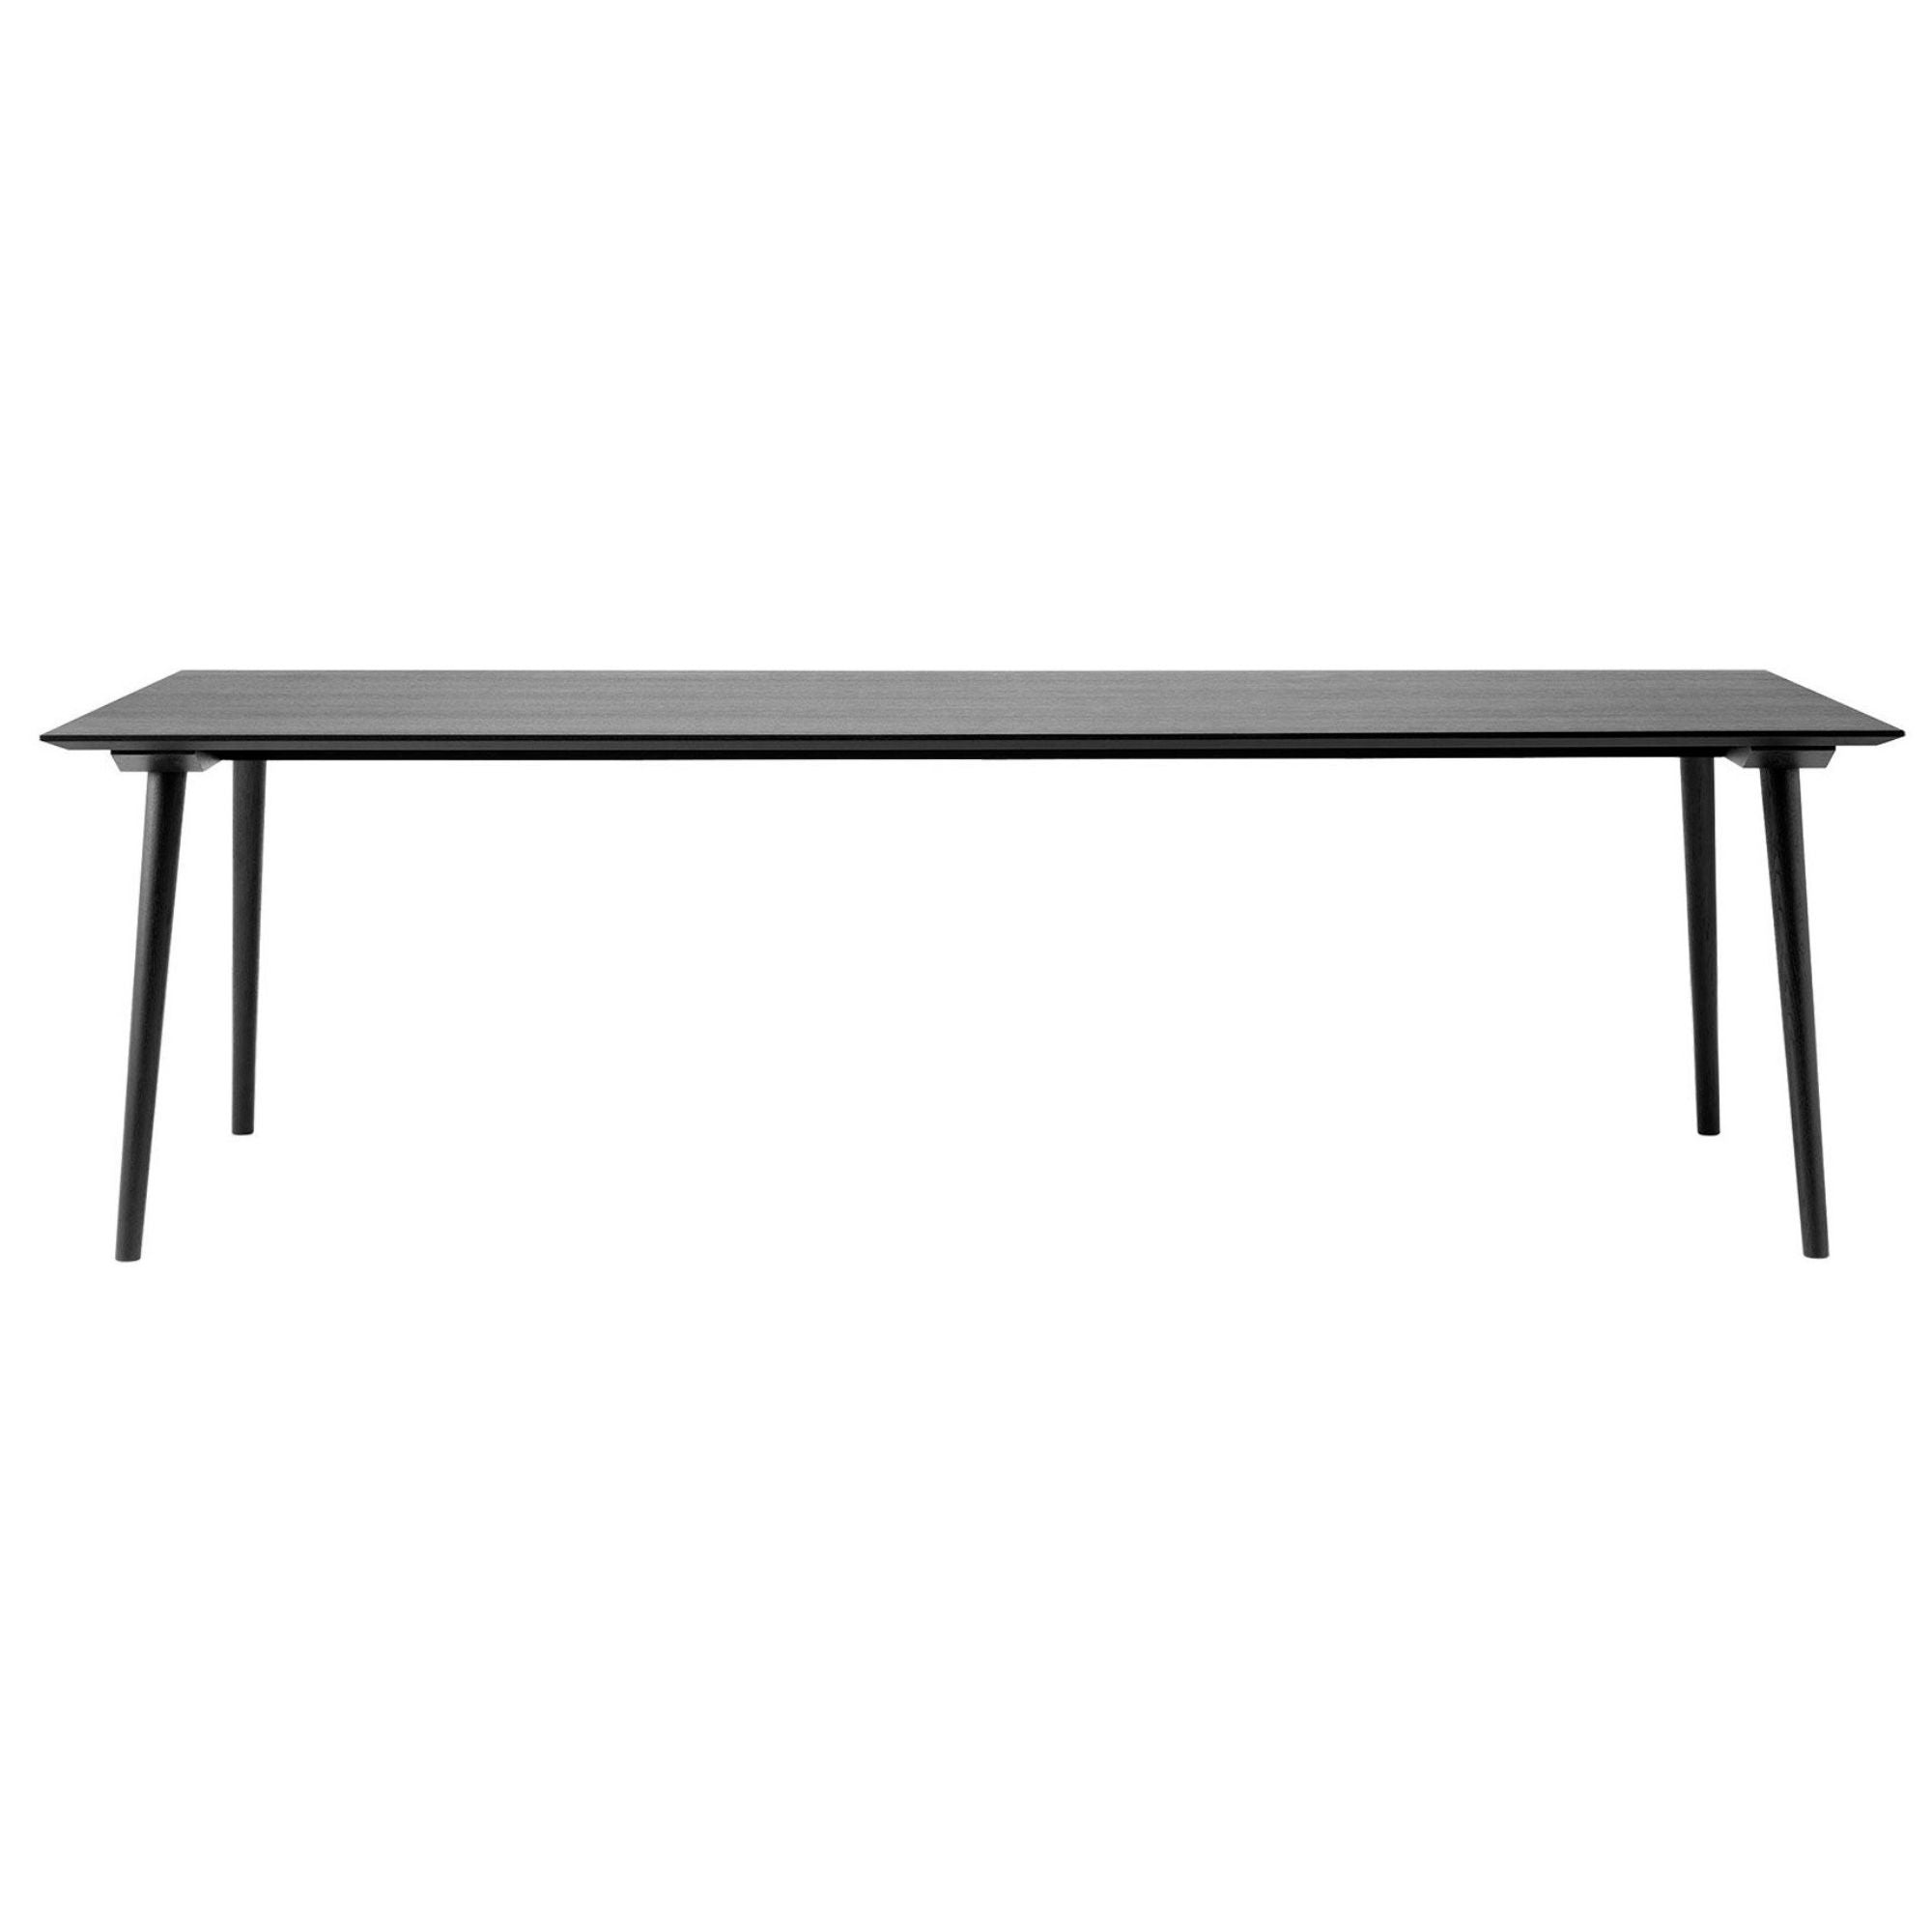 &Tradition SK6 In Between table, black (100x250 cm)